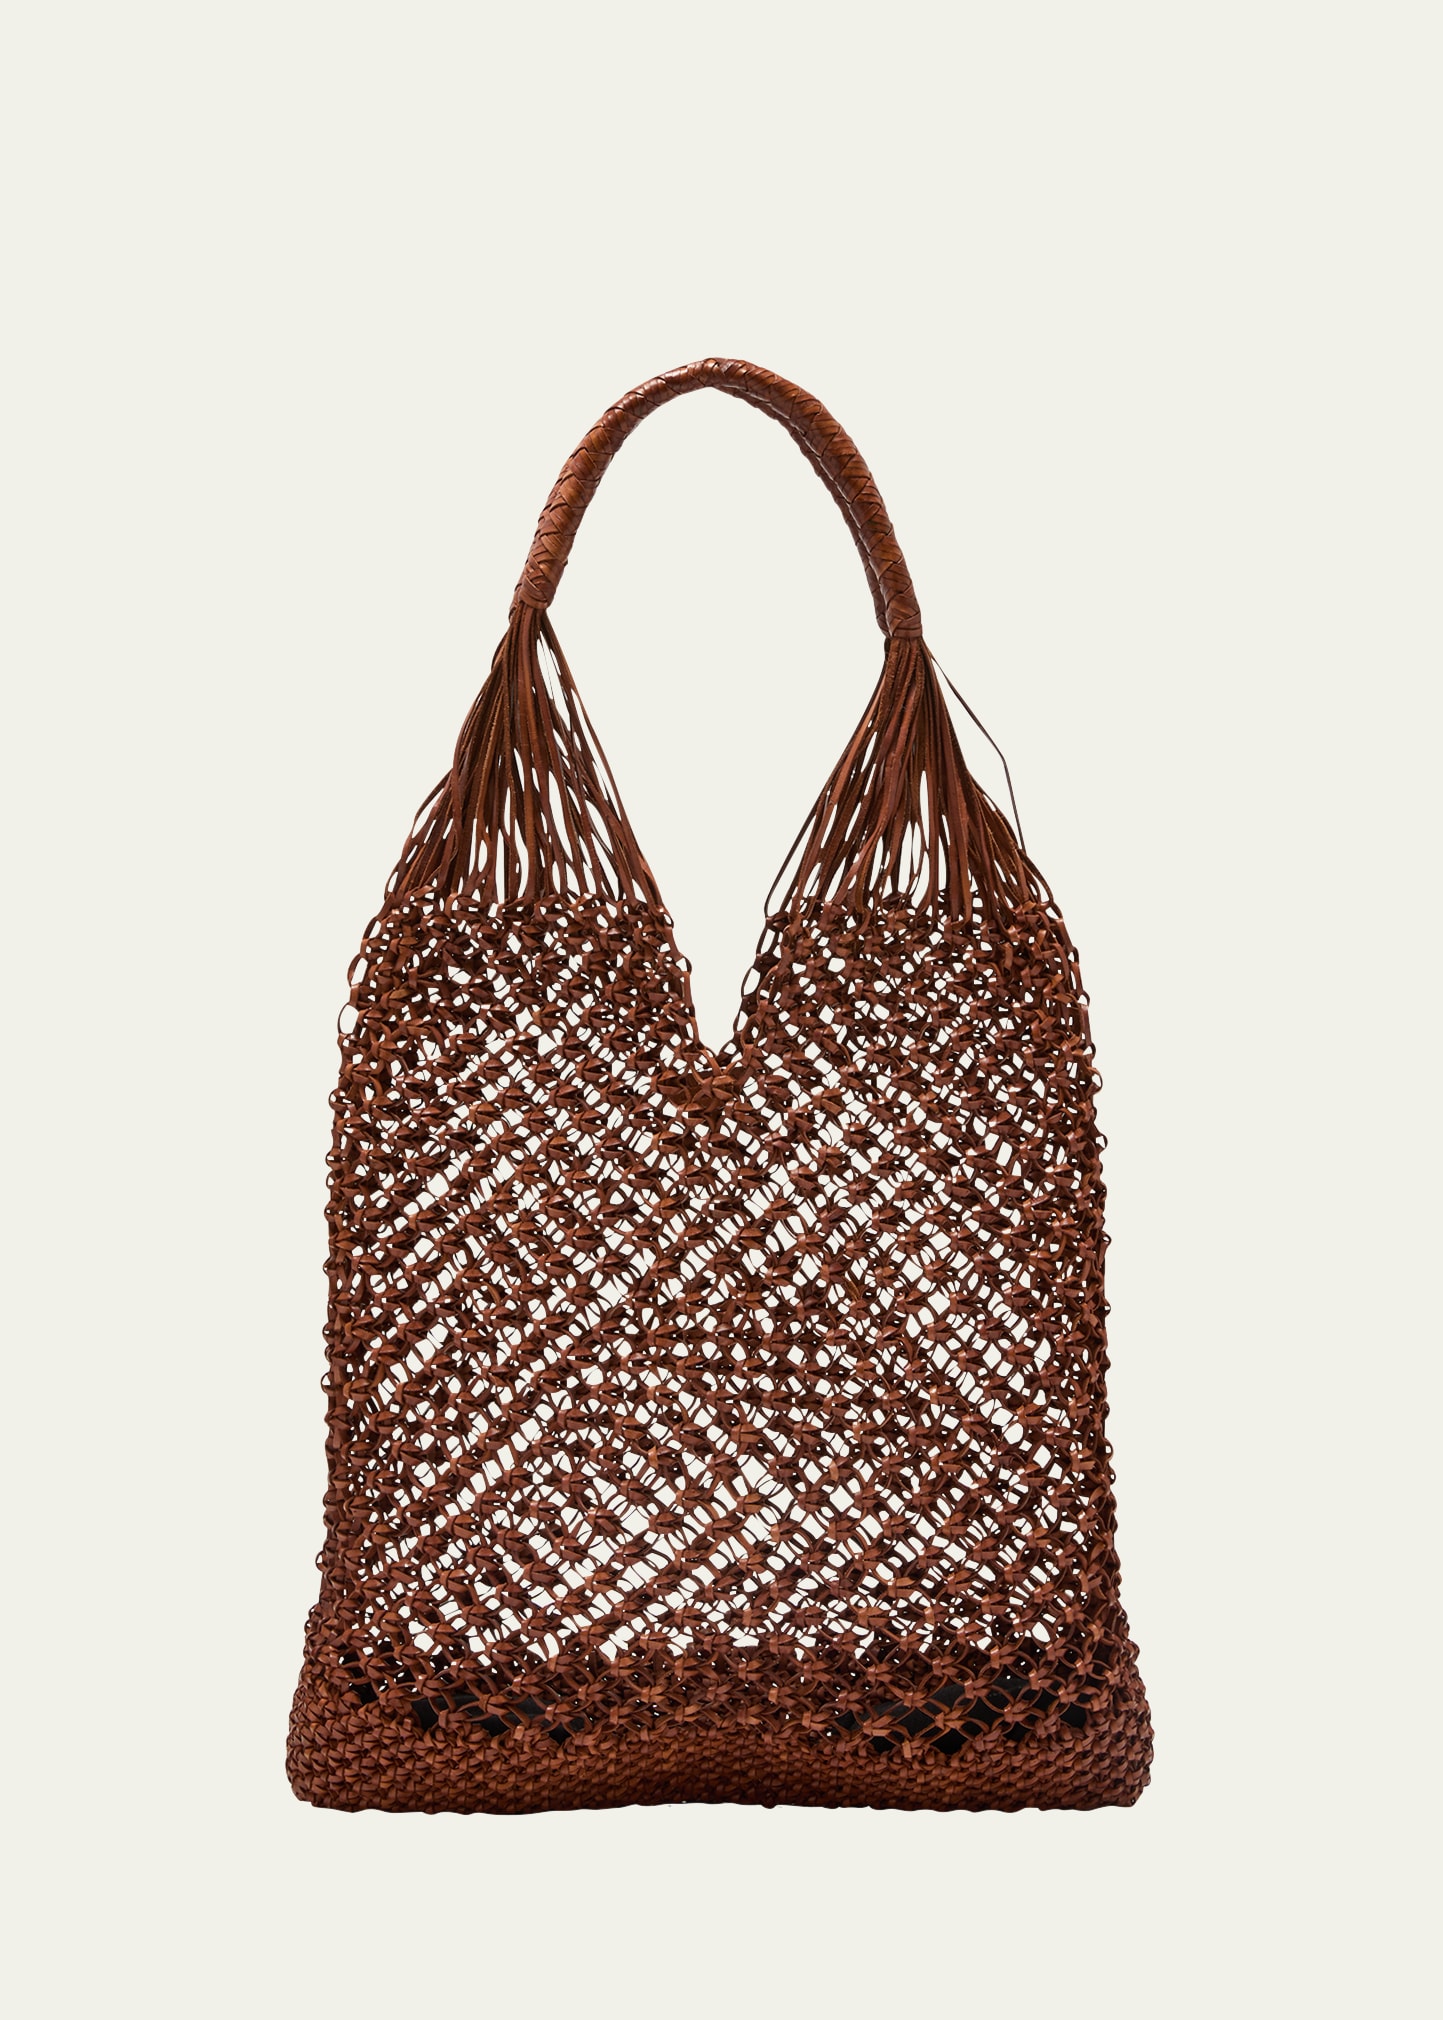 Tulia Large Knotted Leather Tote Bag